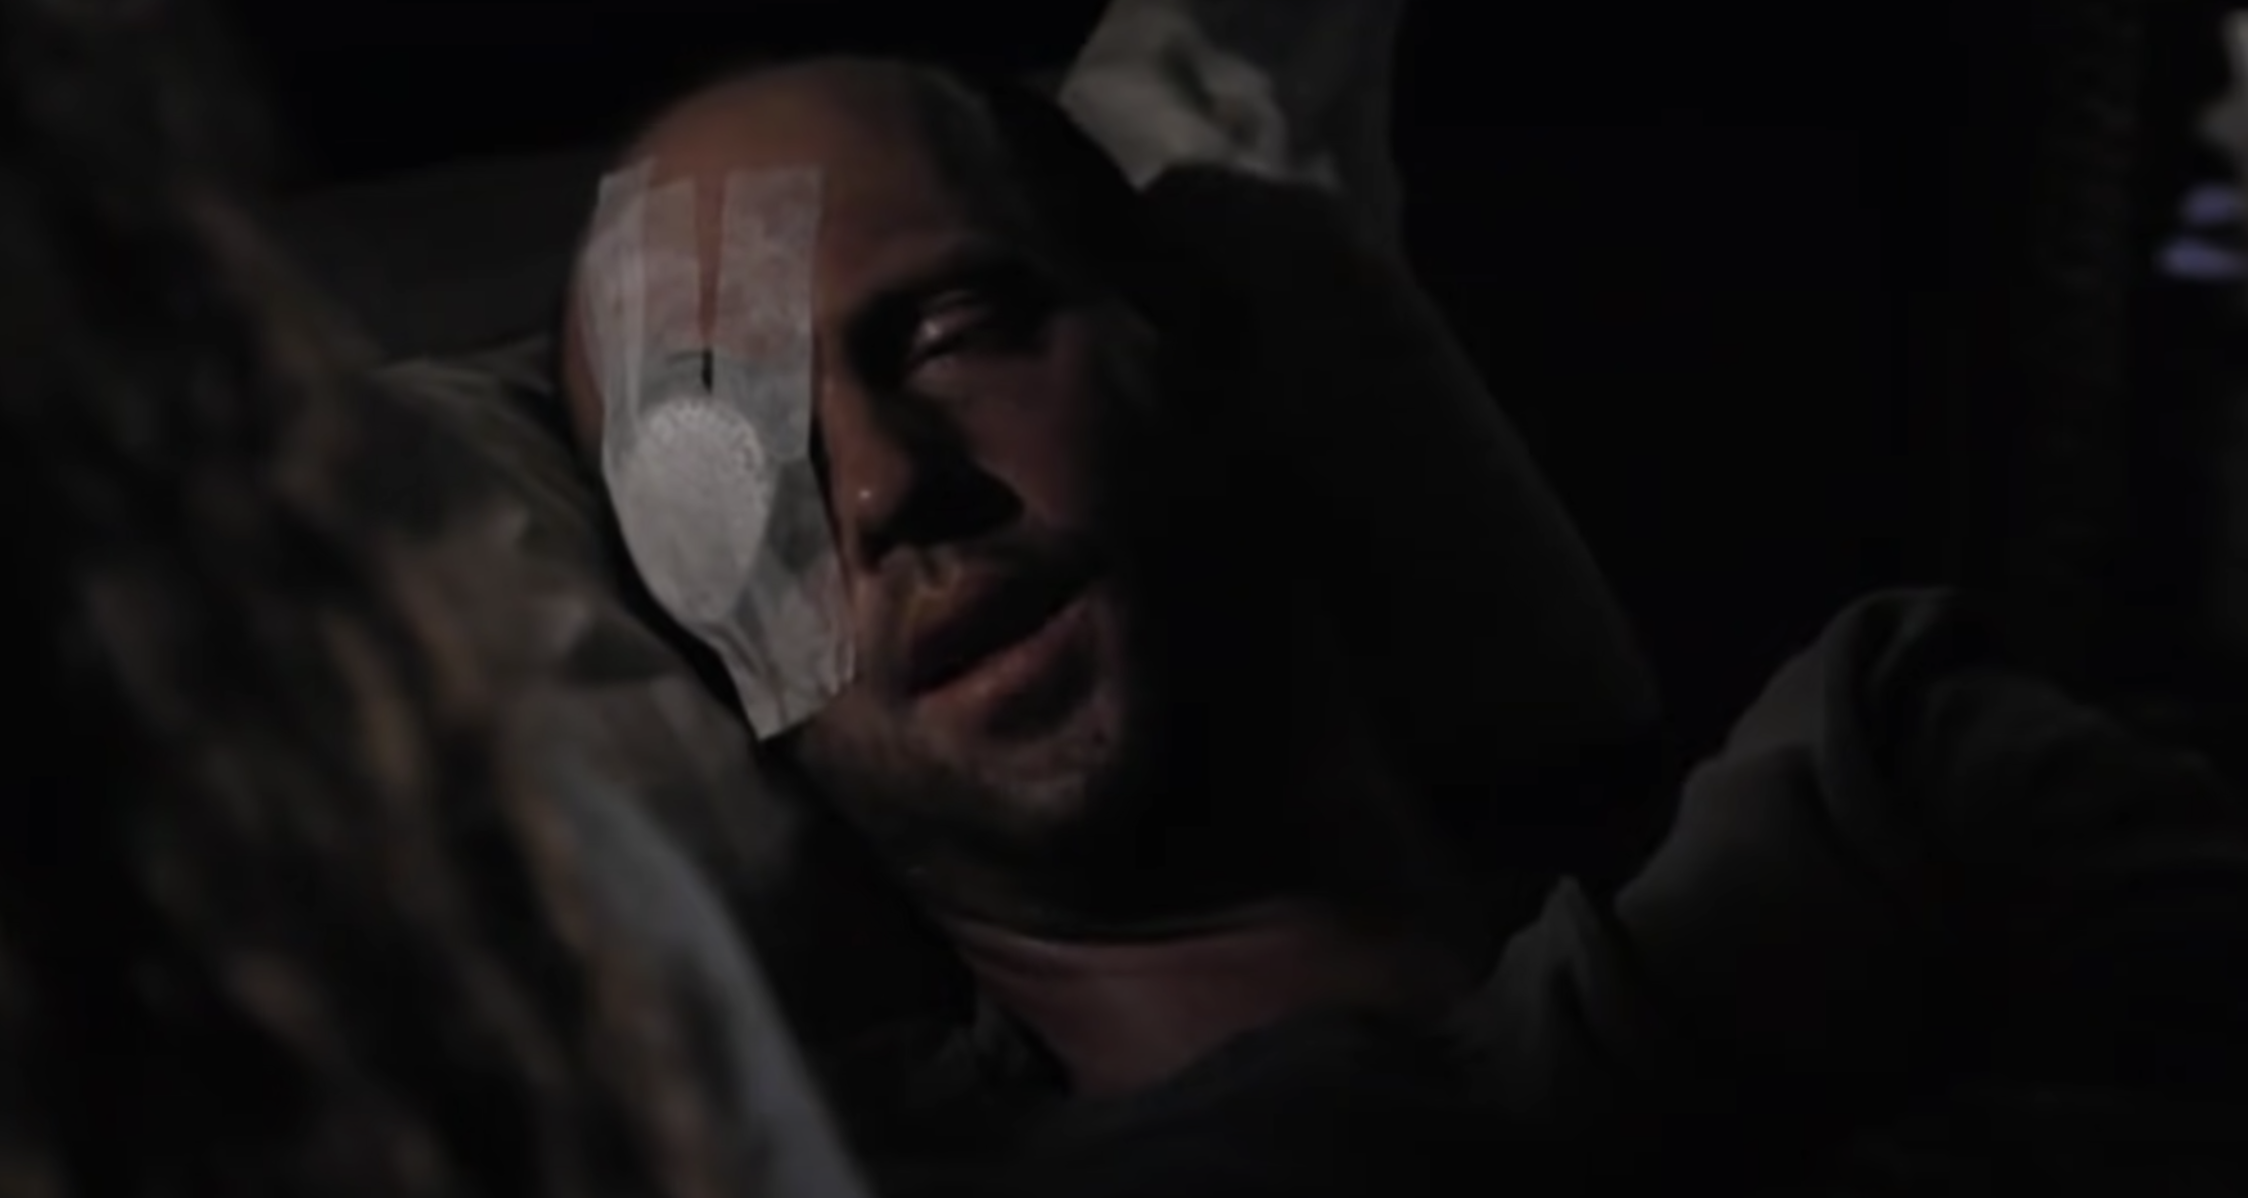 A visibly ill man with a bandaged eye lies in bed